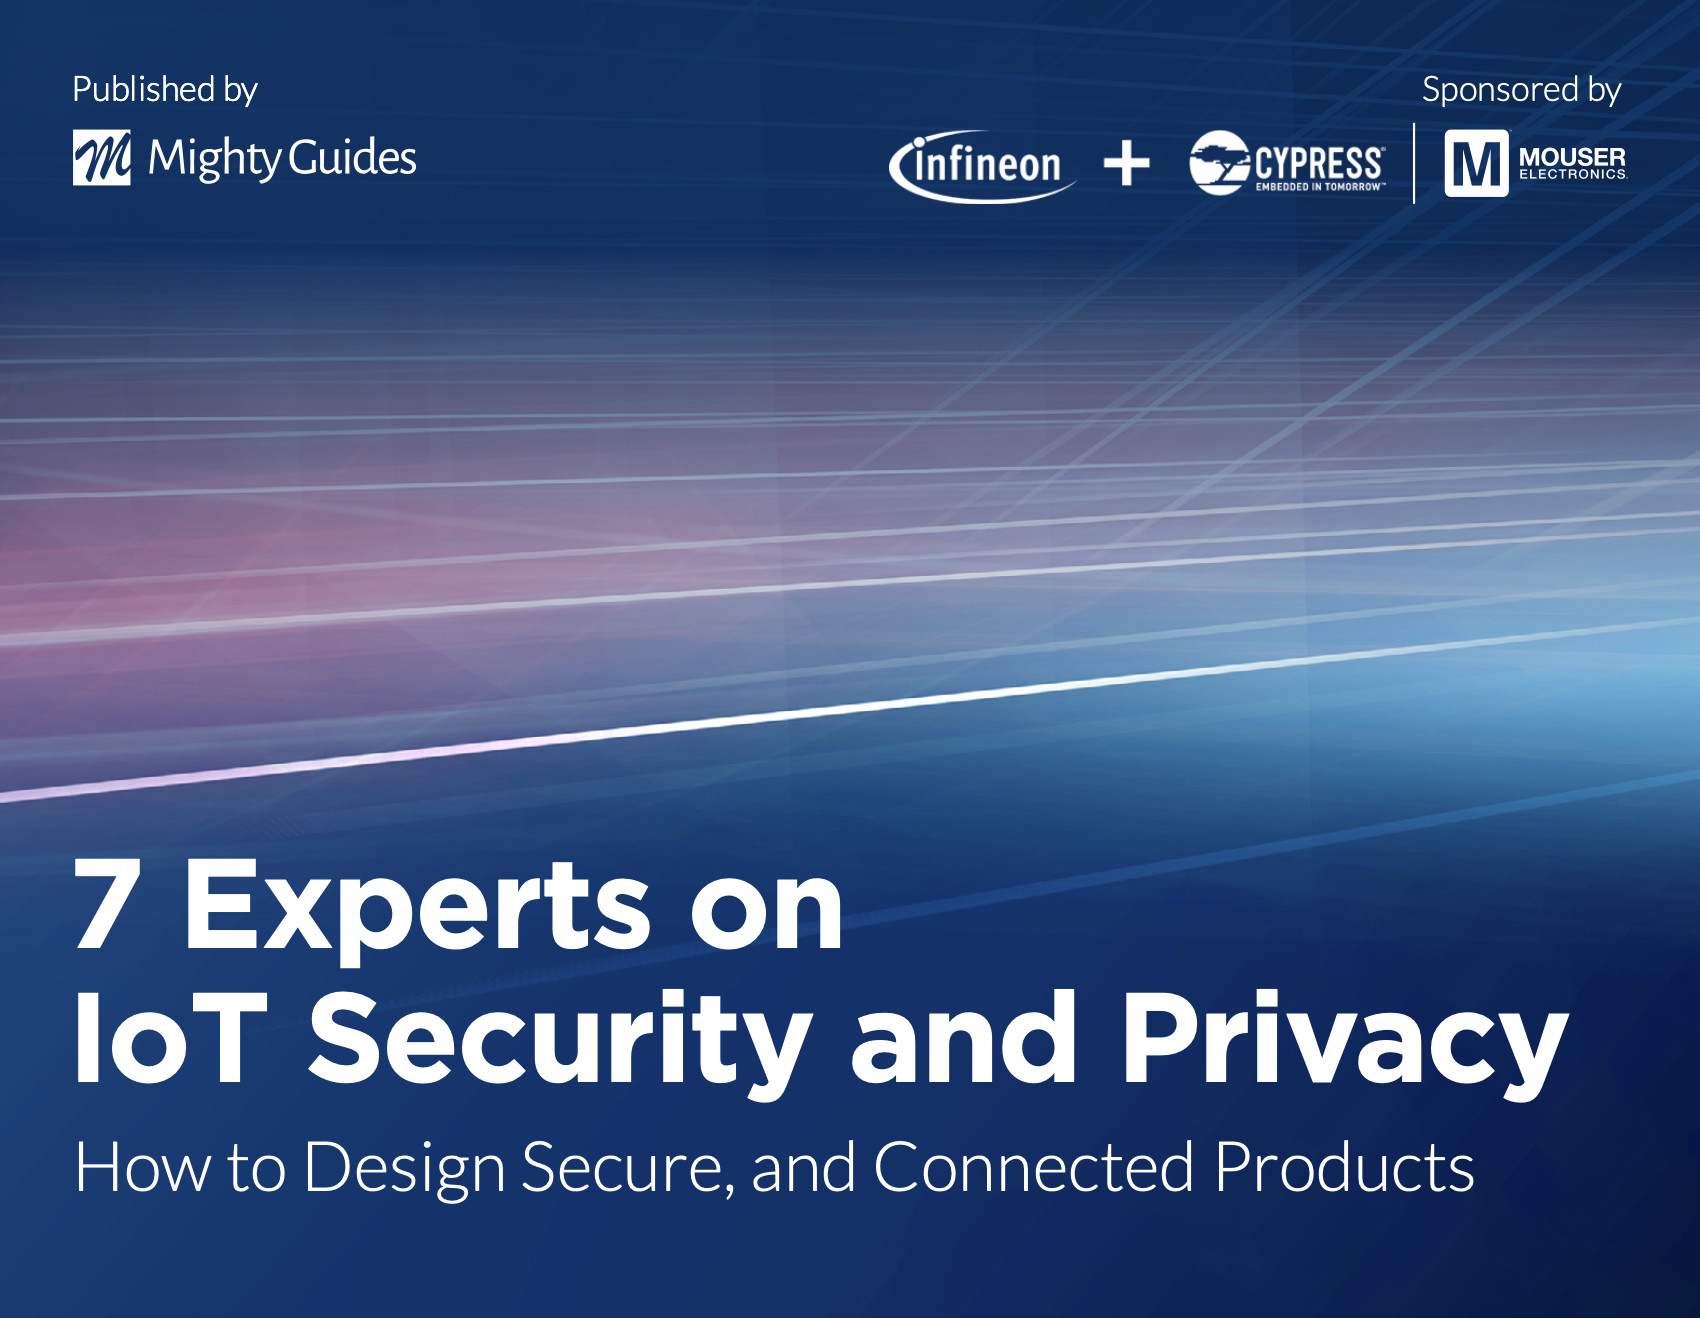 7 Experts on IoT Security and Privacy